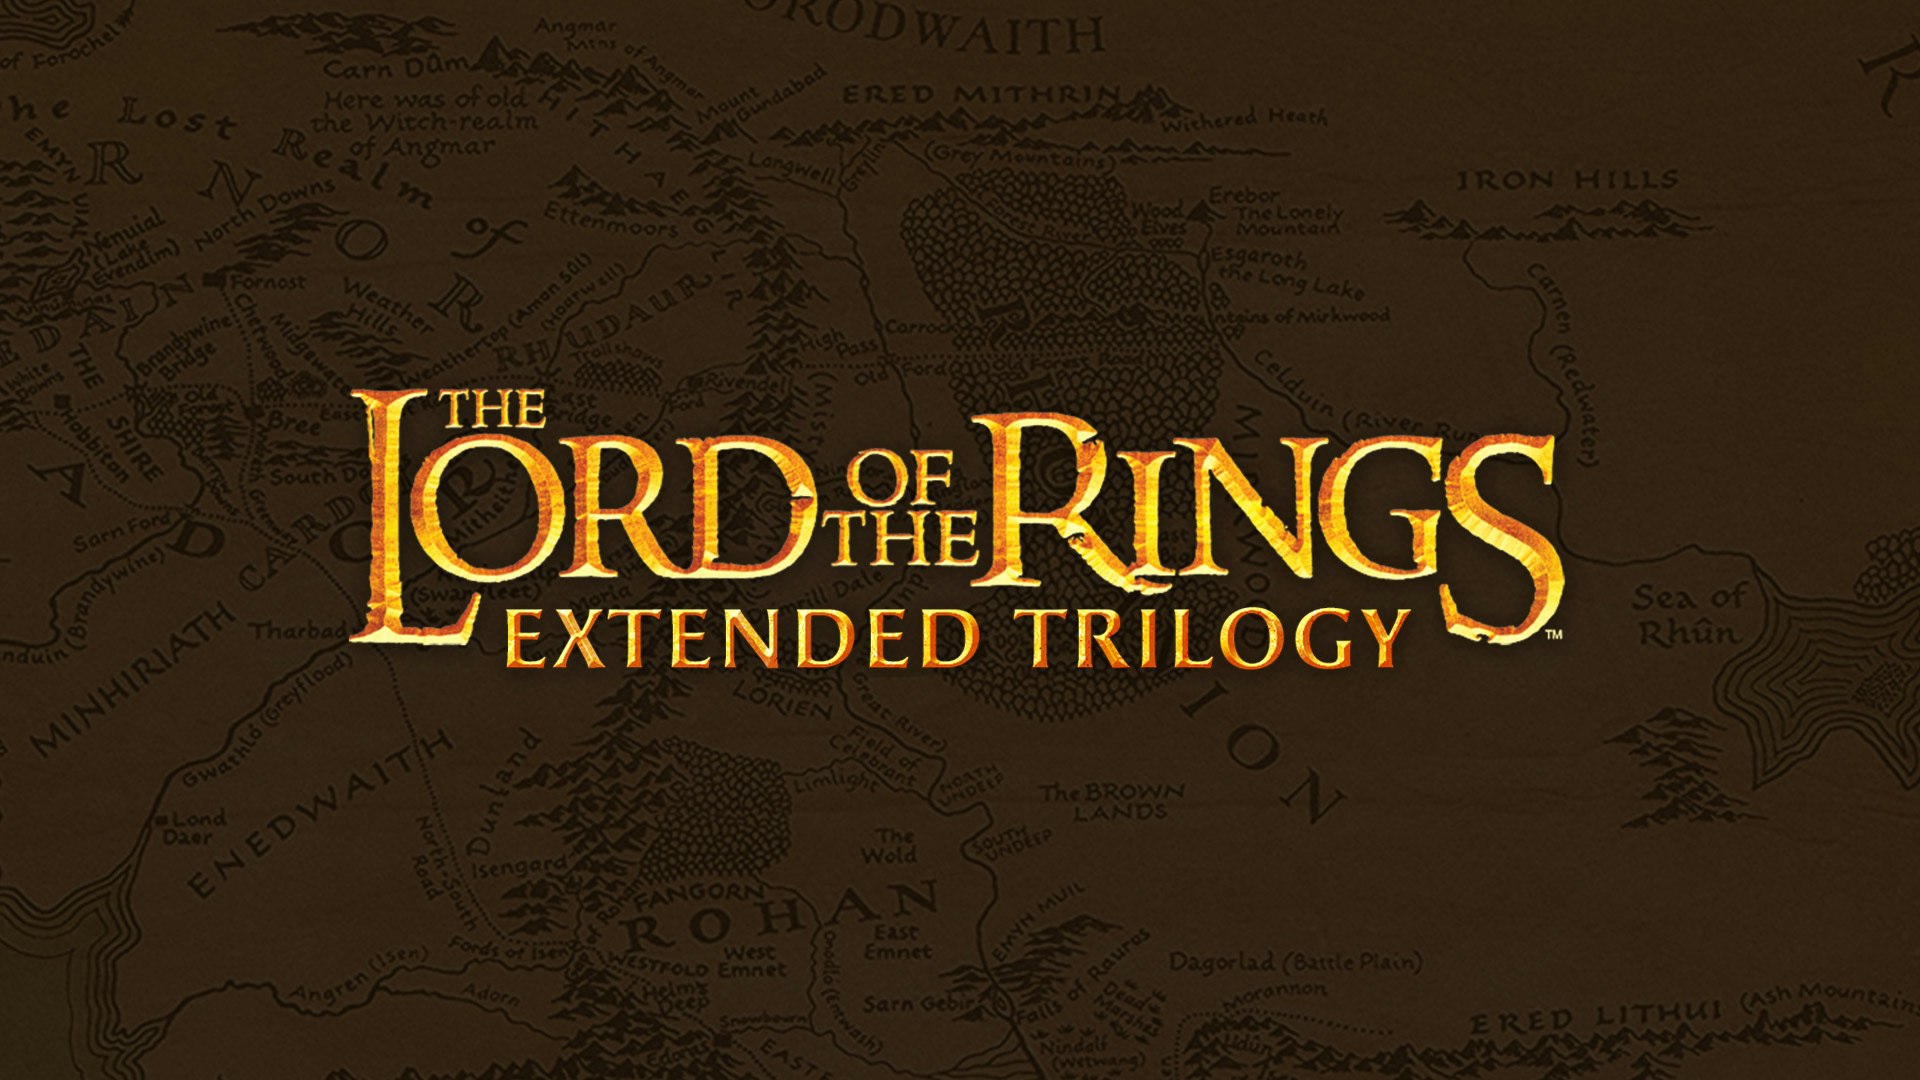 The Lord of the Rings Extended Trilogy Alamo Drafthouse Cinema